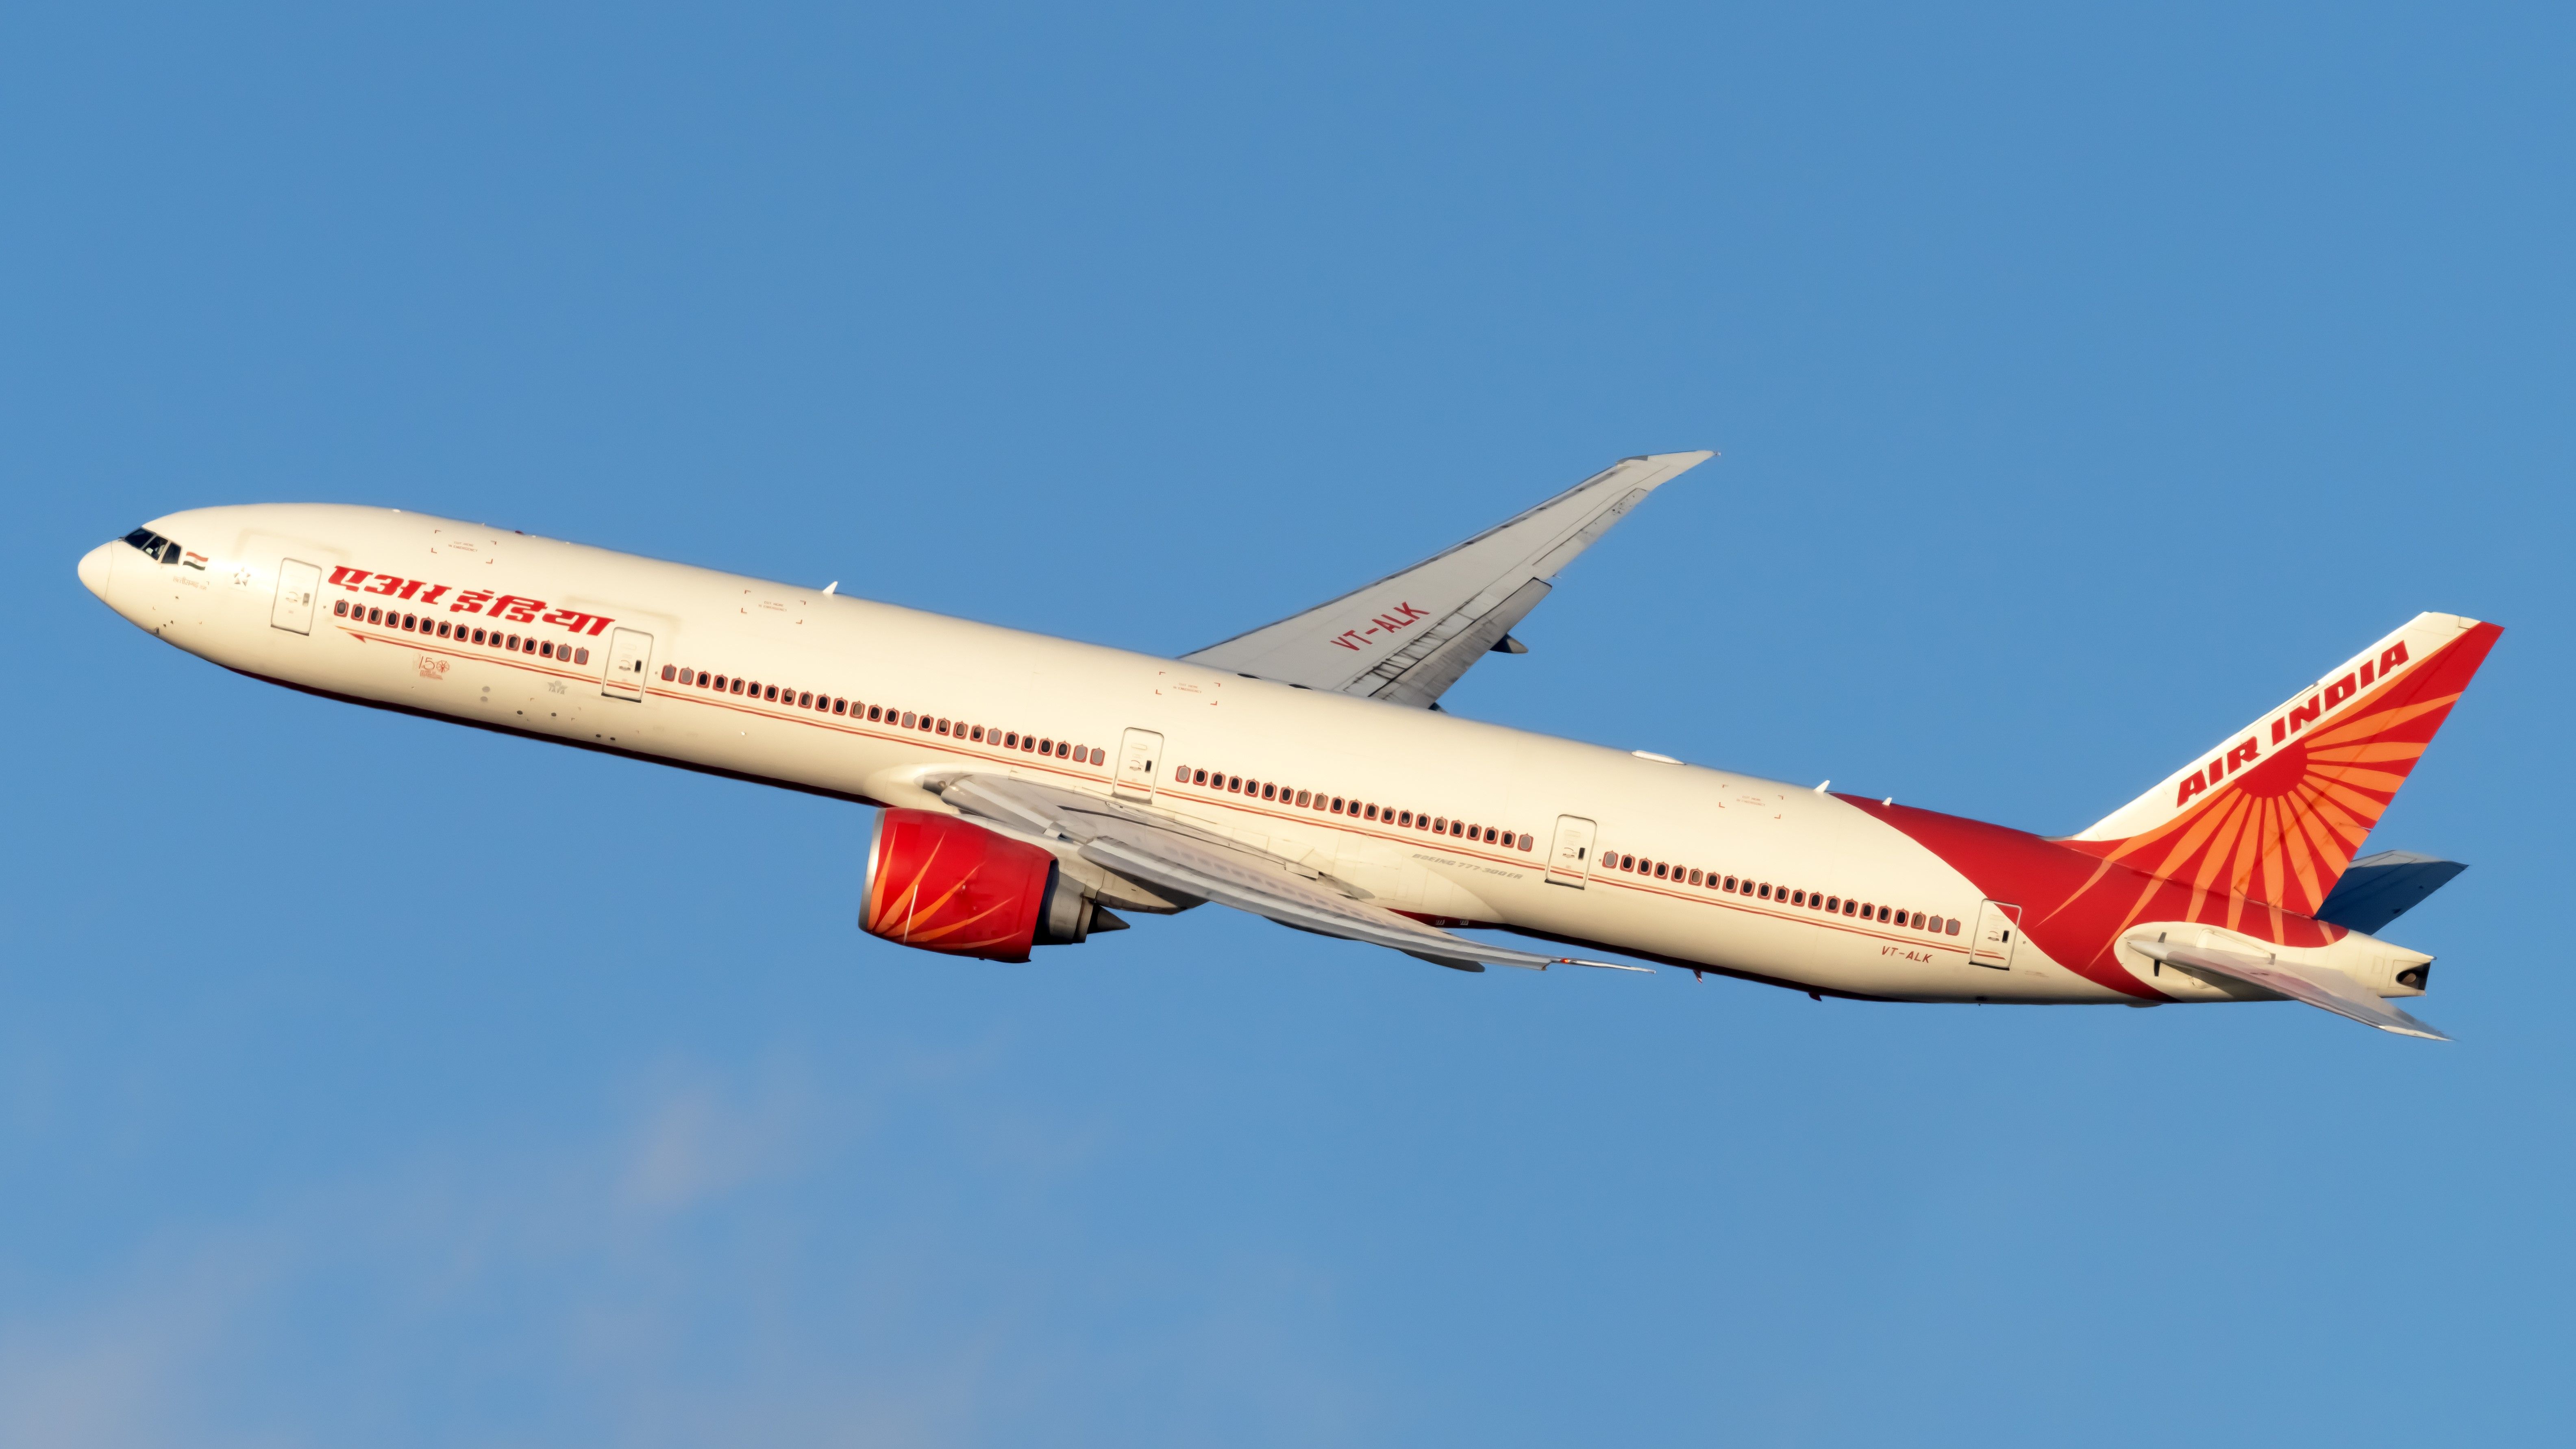 An Air India Boeing 777-300 flying in the sky.